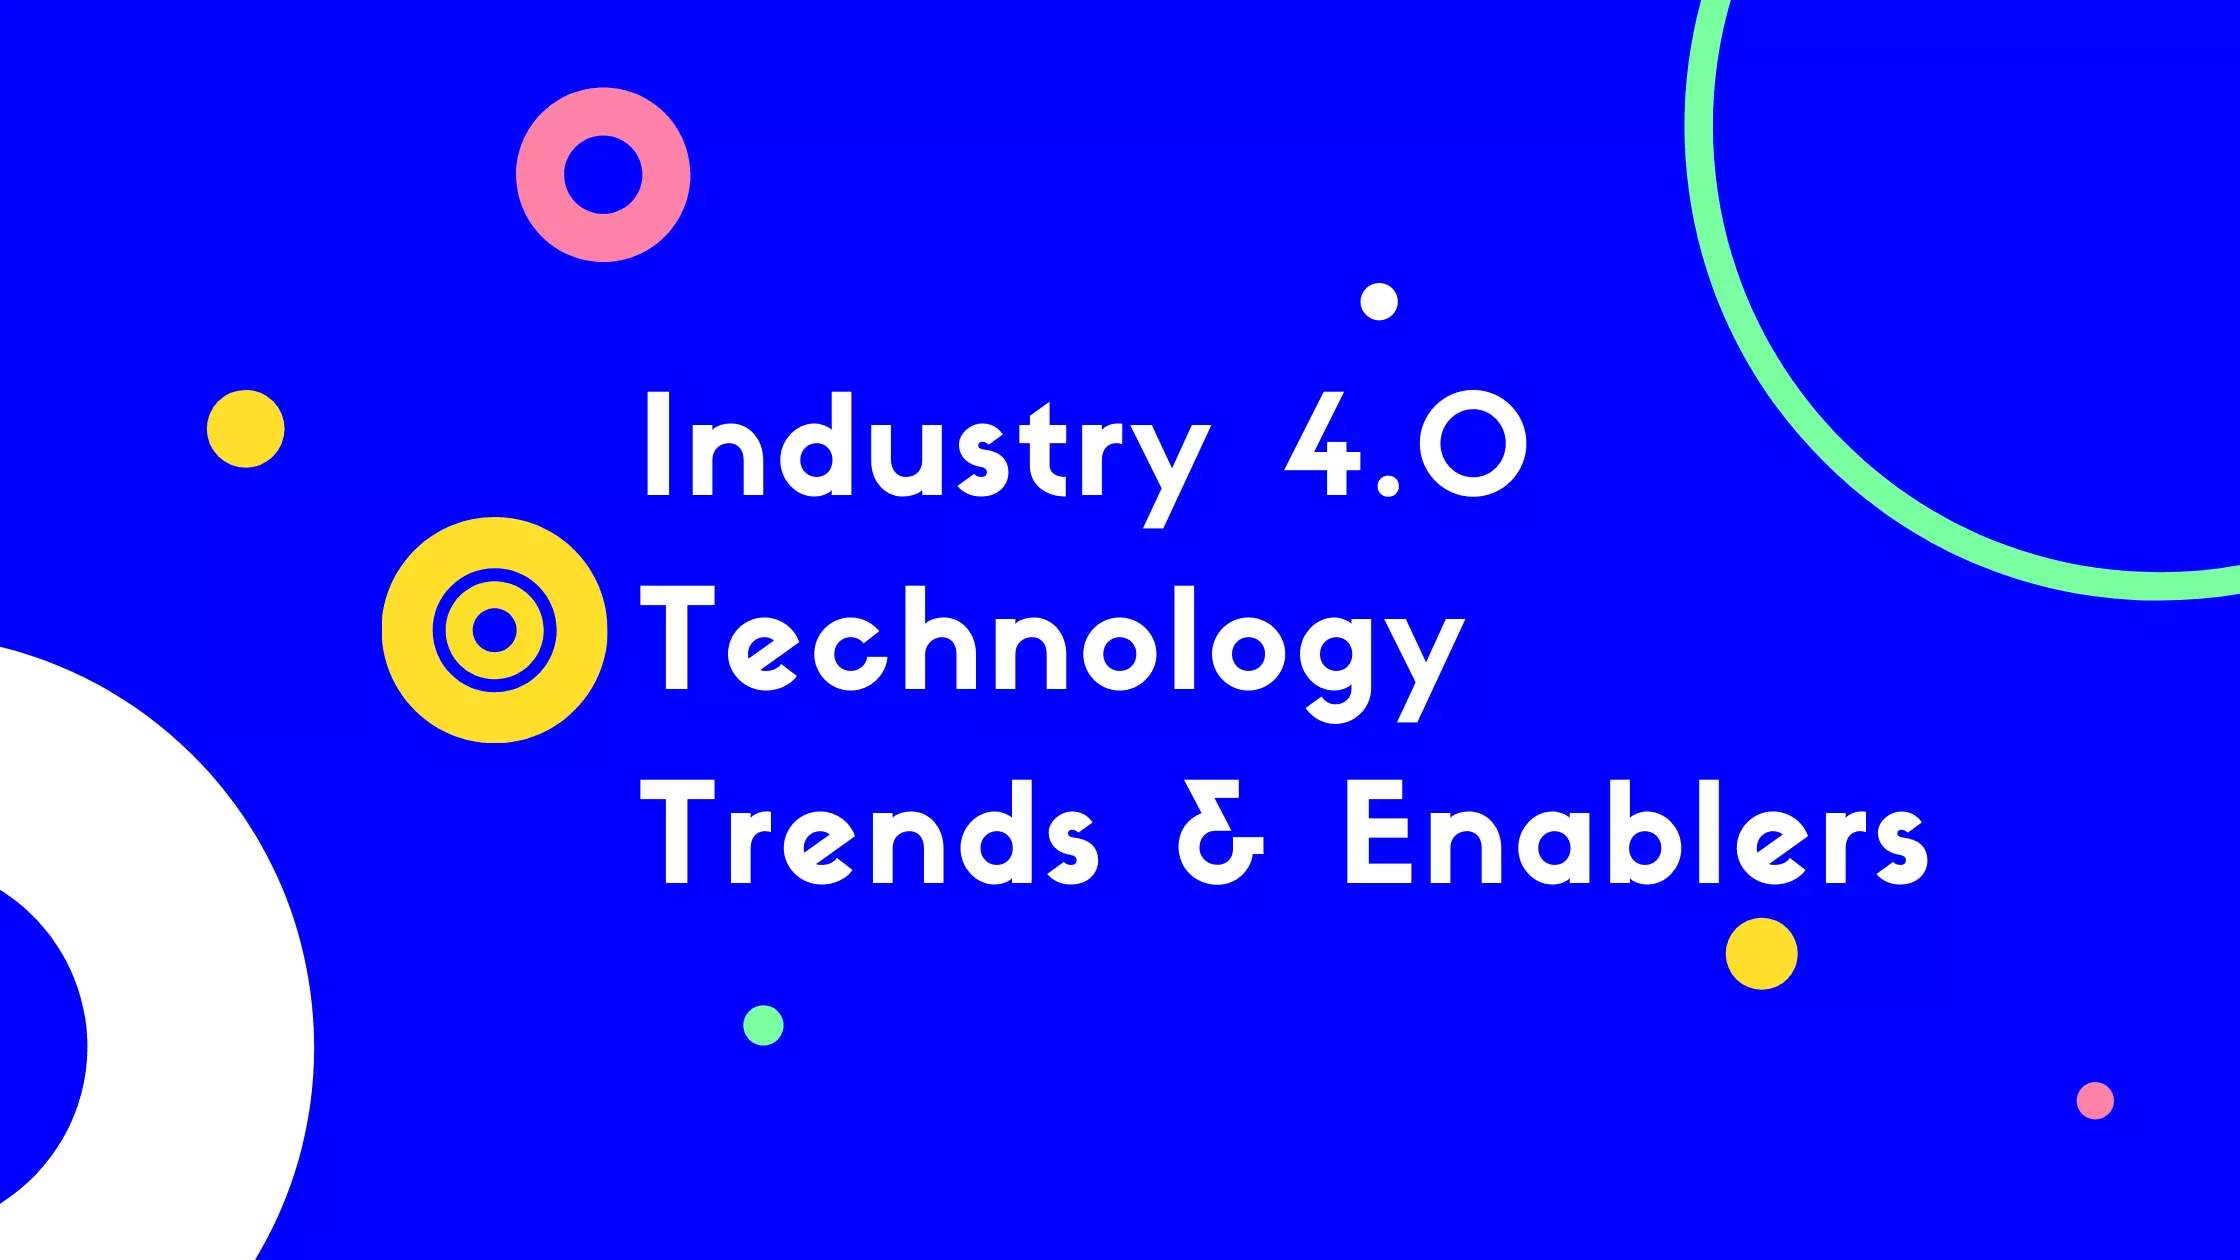 Industry 4.0 Technology Trends and Enablers